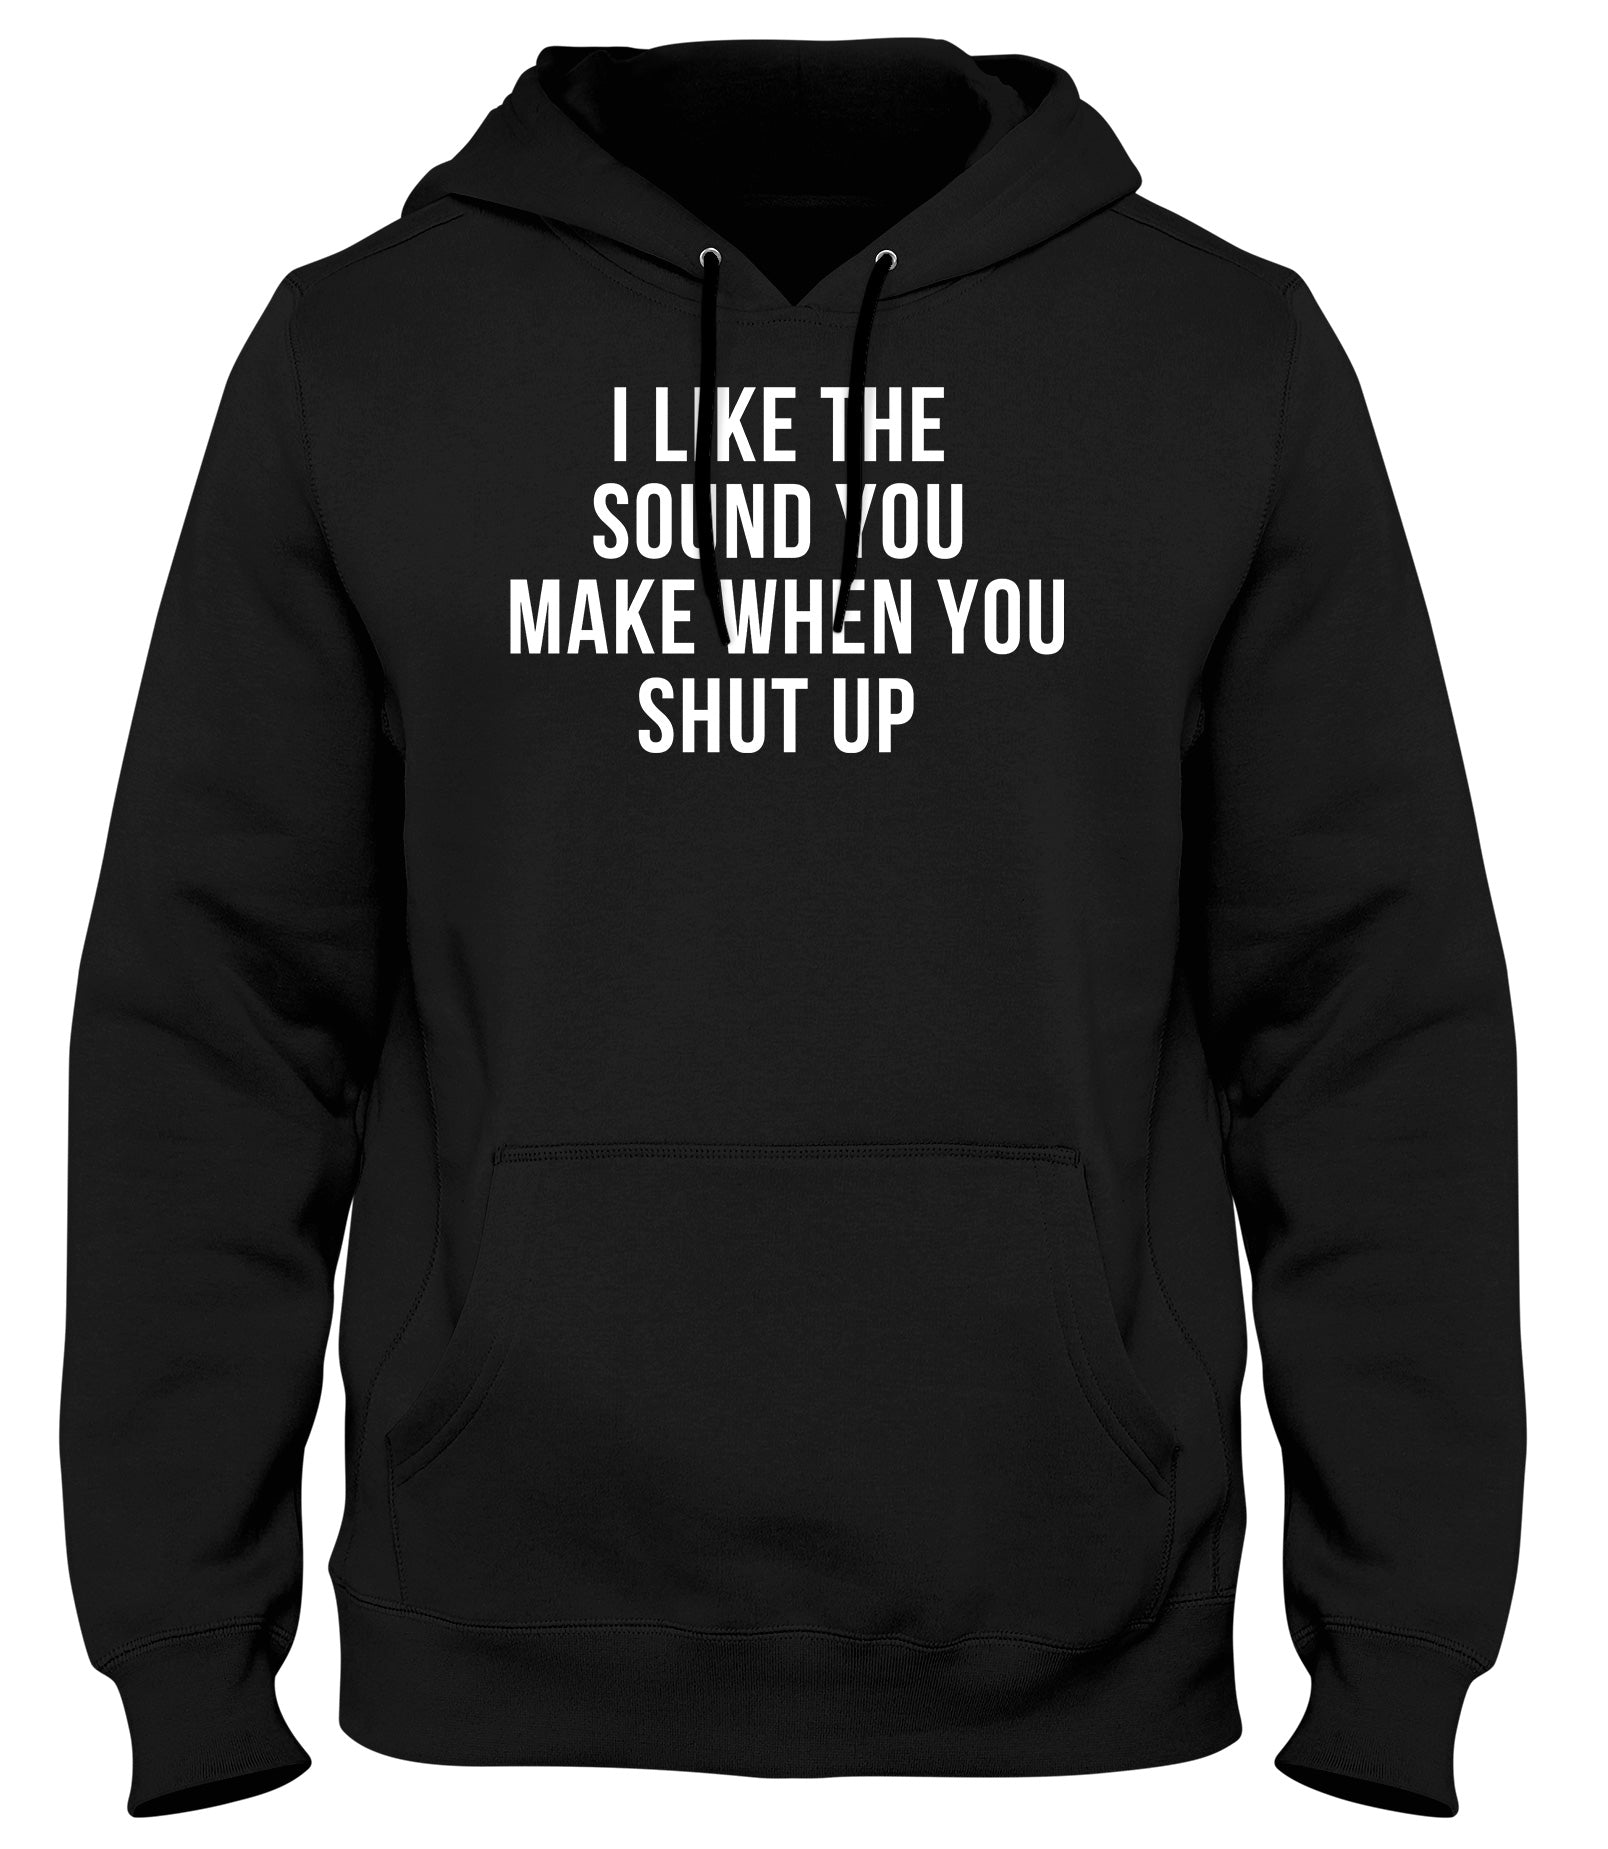 I LIKE THE SOUND YOU MAKE WHEN YOU SHUT UP MENS WOMENS UNISEX FUNNY HOODIE